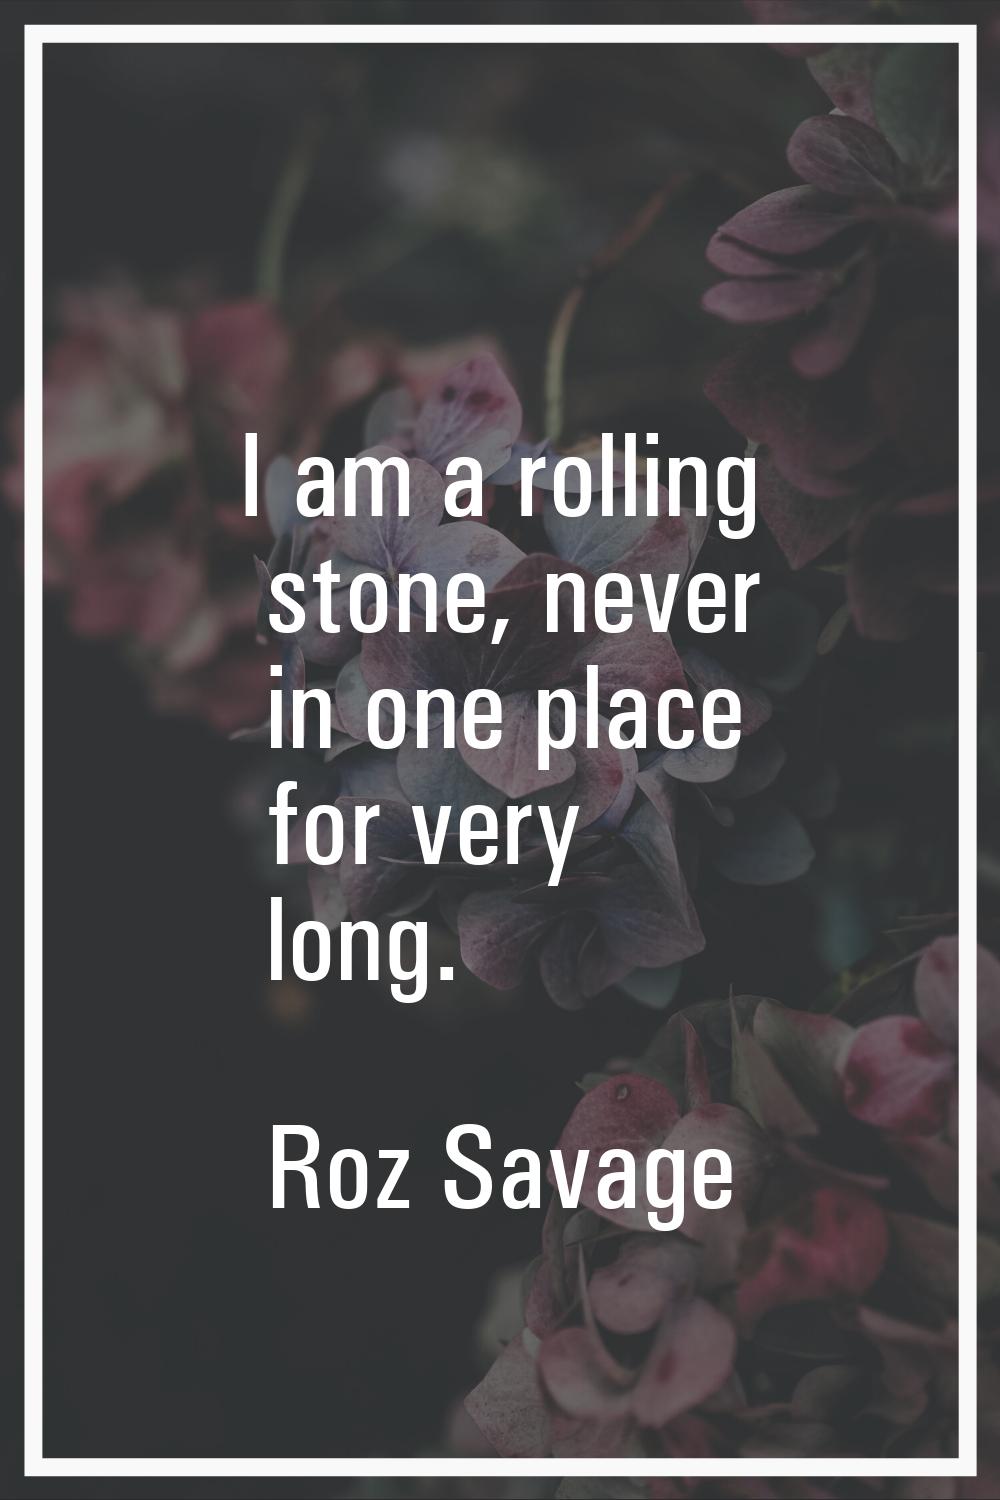 I am a rolling stone, never in one place for very long.